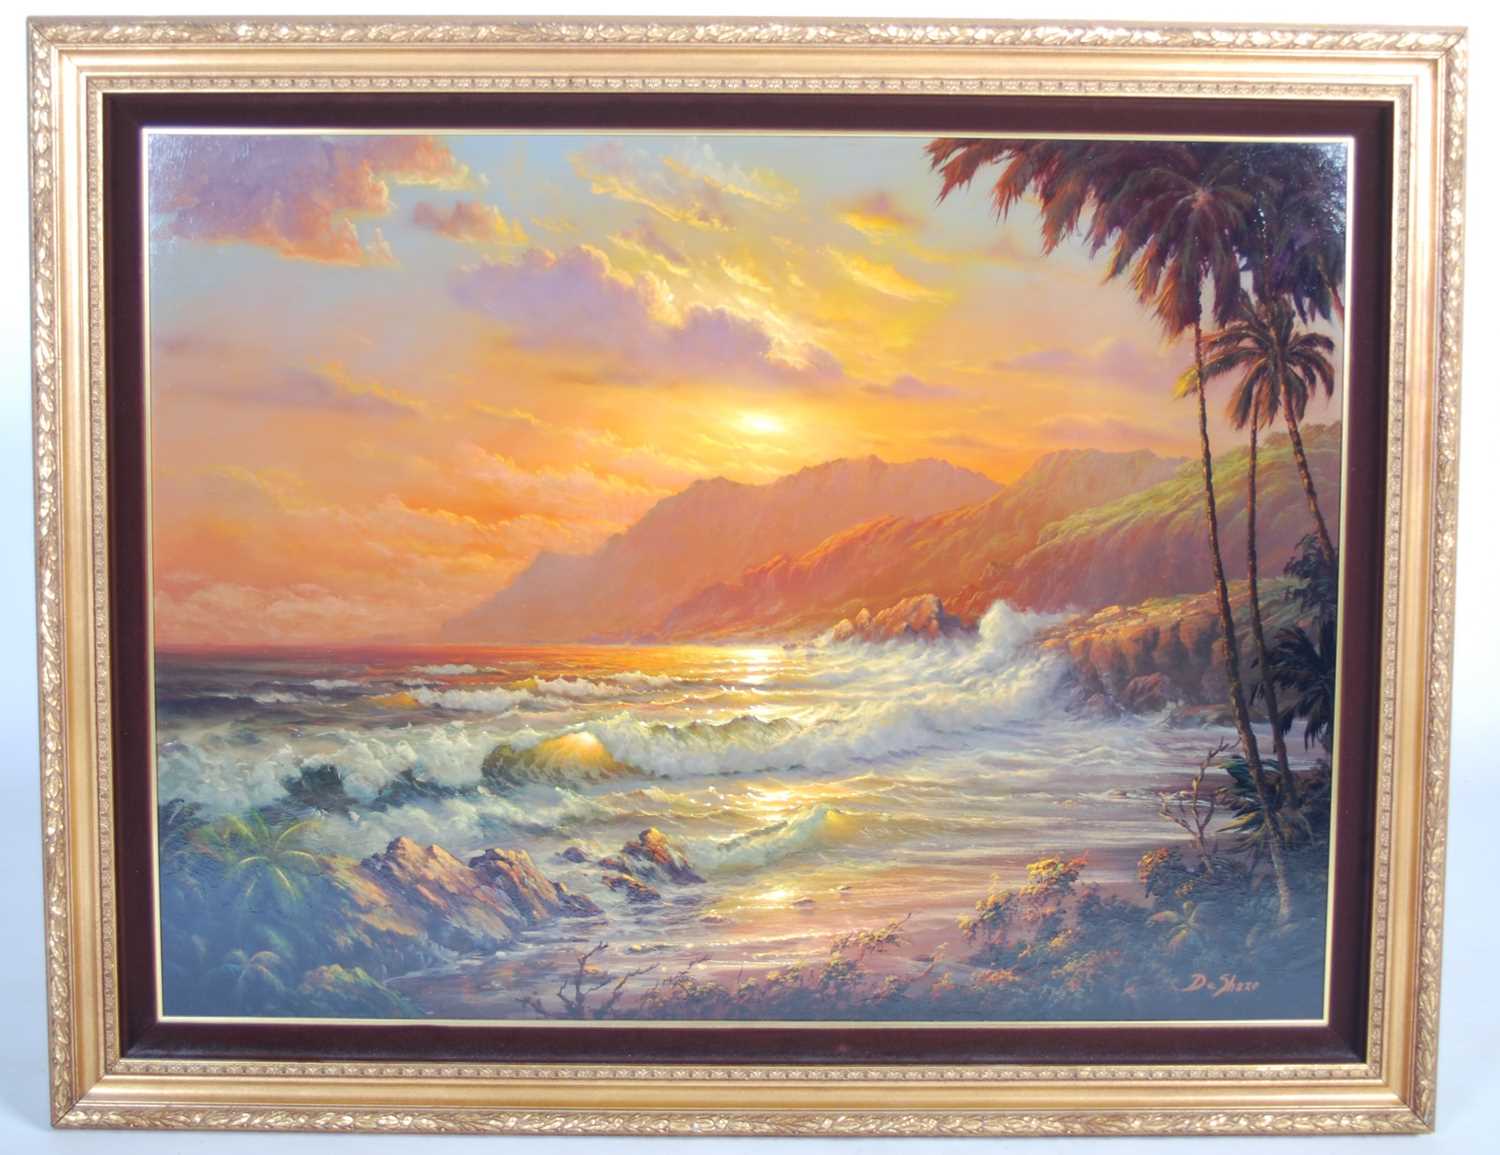 William Deshazo (American, 20th century) Sunset with breaking waves oil on board, signed lower right - Image 2 of 5